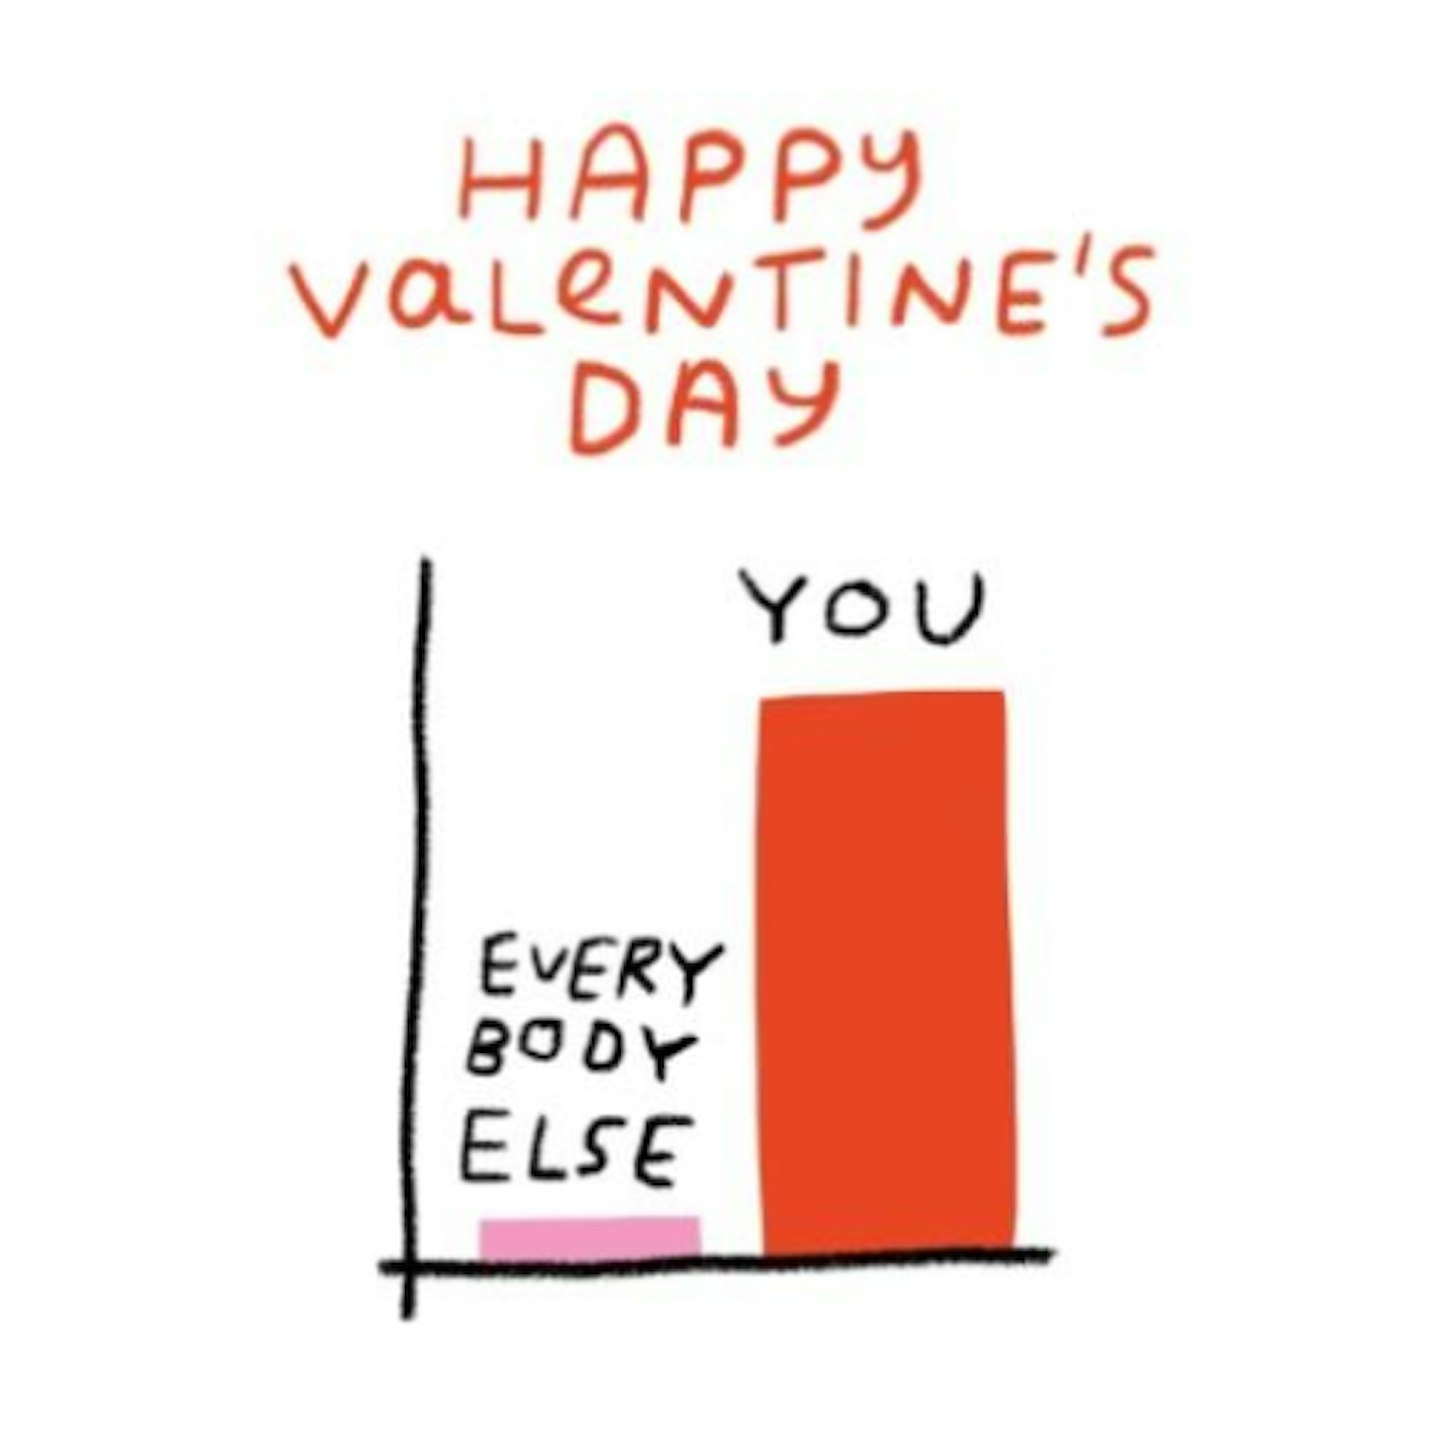 You And Everybody Else Funny Chart Valentines Card